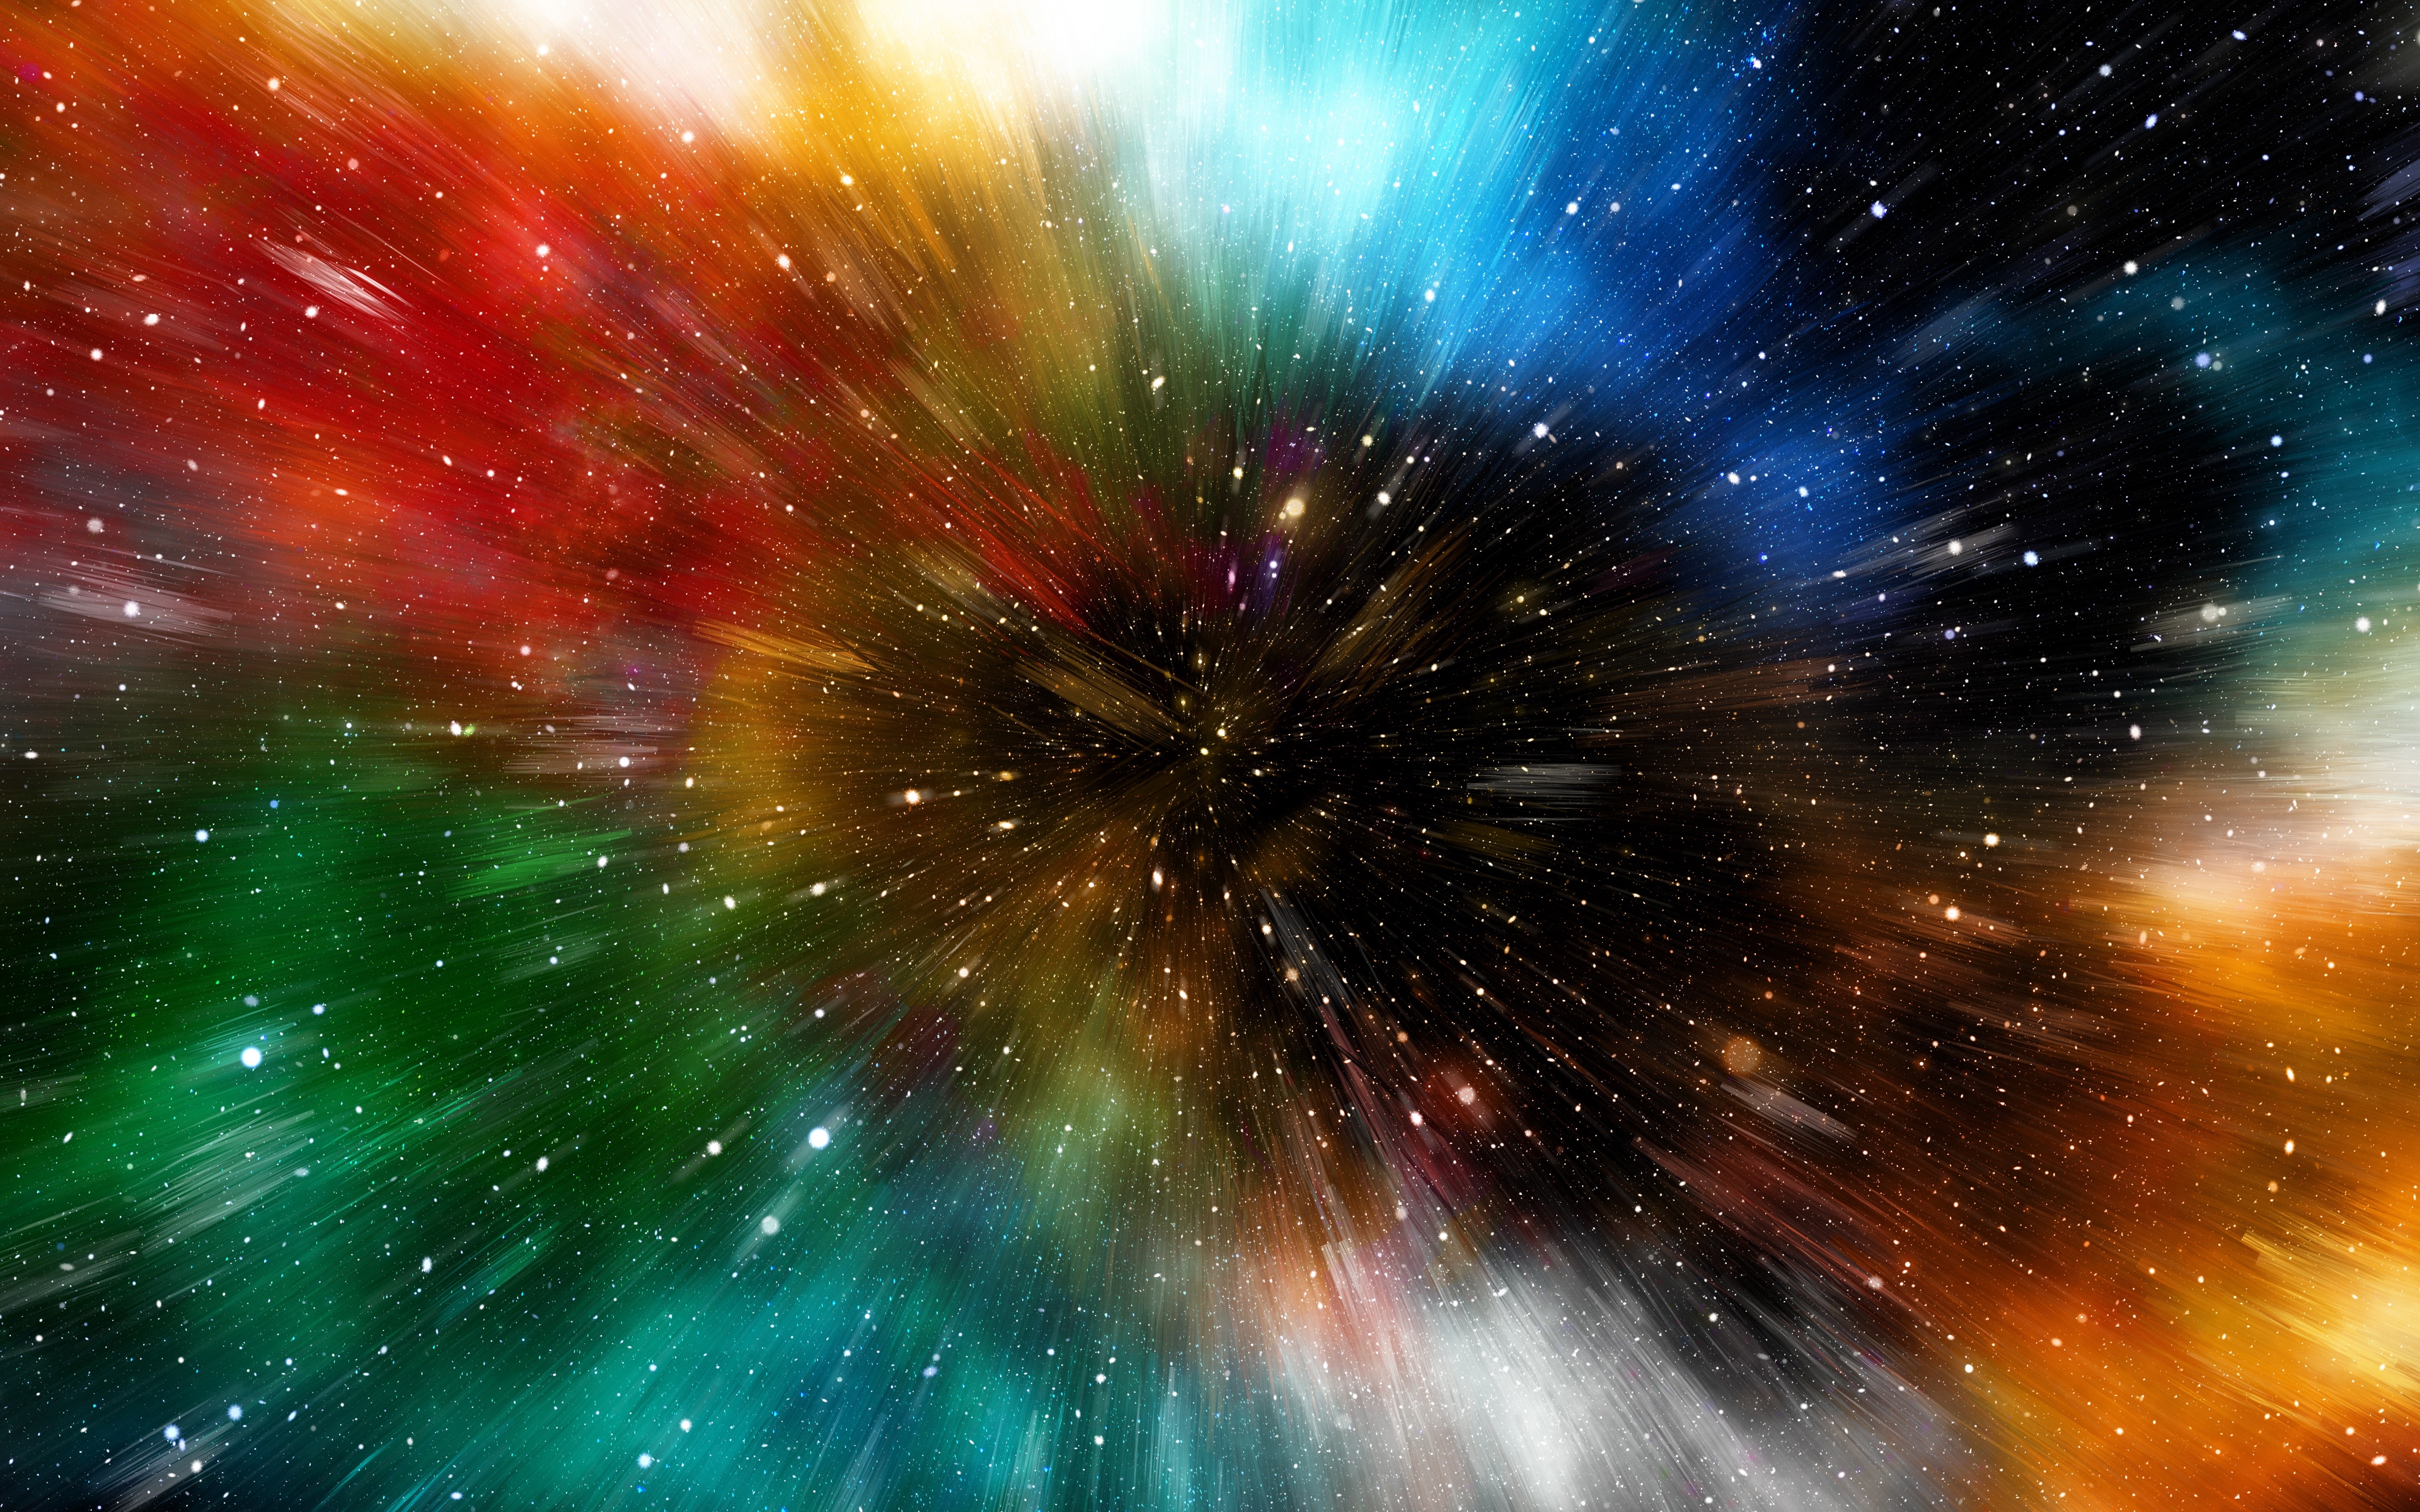 Wallpaper Universe, Galaxy, Multicolored, Immersion - Imagea 2020 Happy New Year , HD Wallpaper & Backgrounds